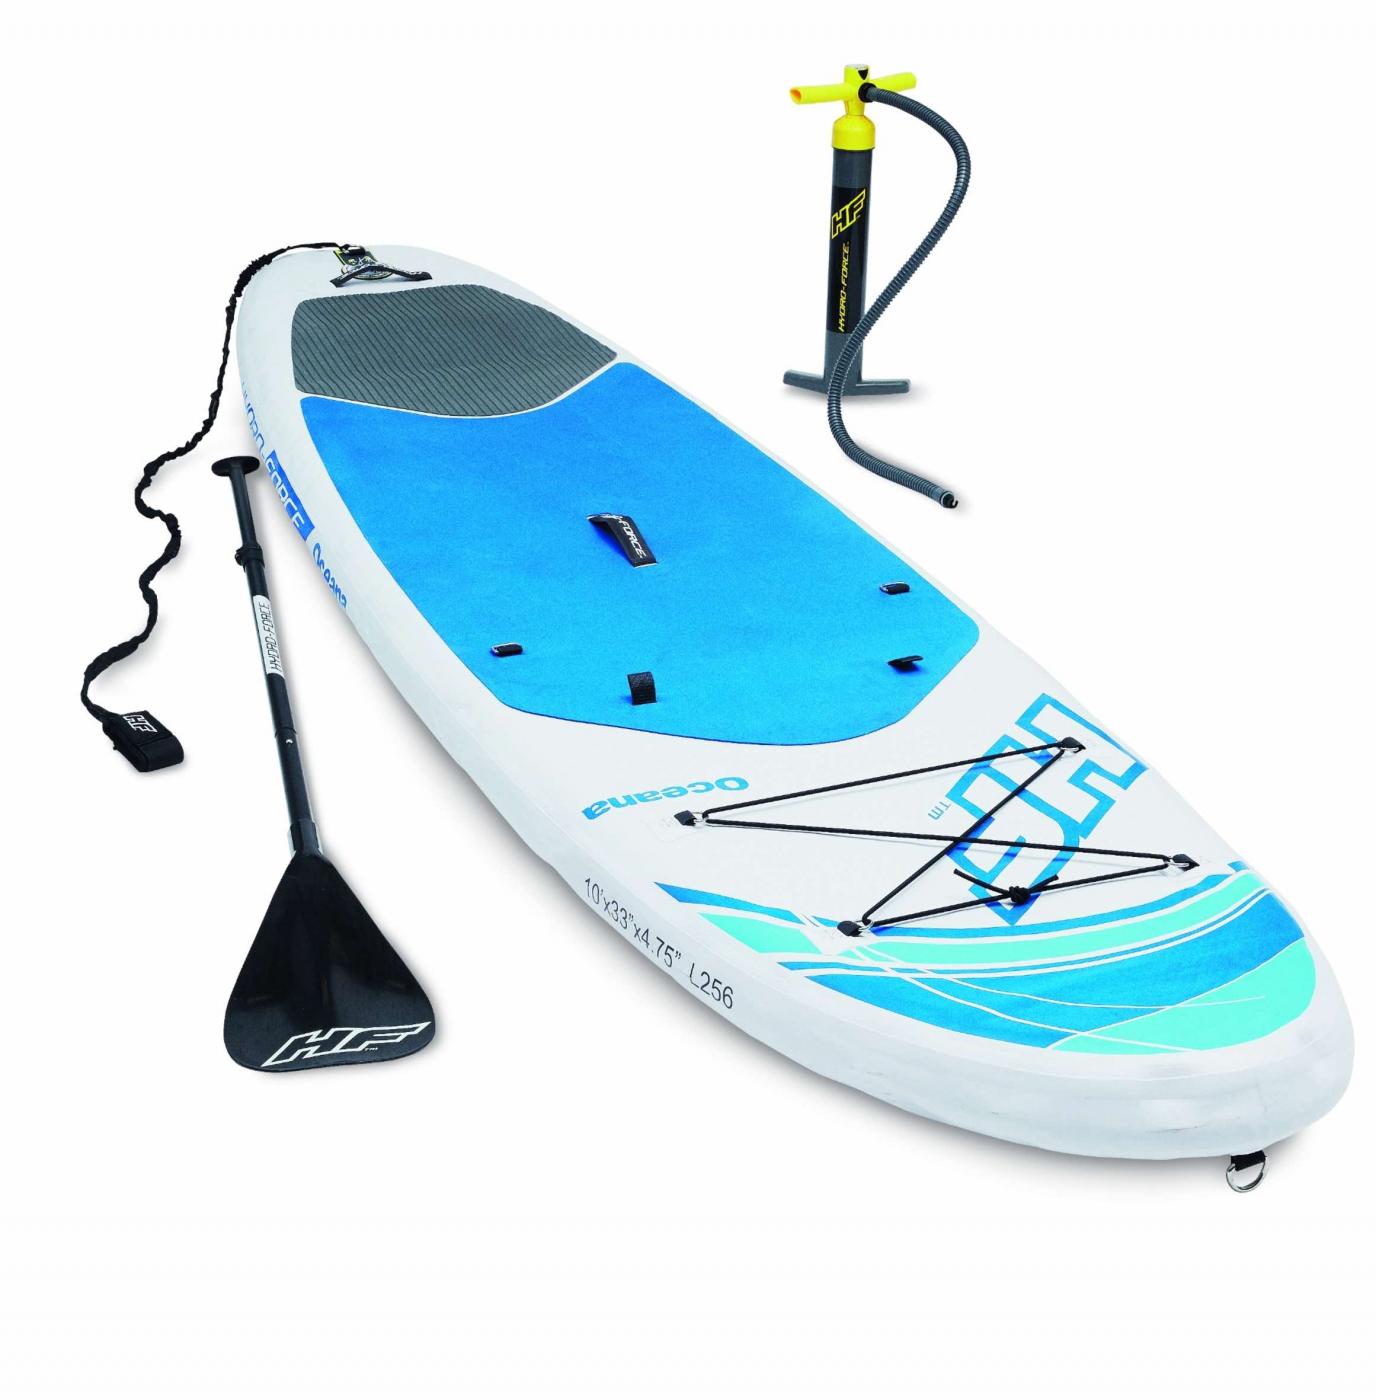 Aldi selling inflatable stand up paddle boards as a Special Buy 2018